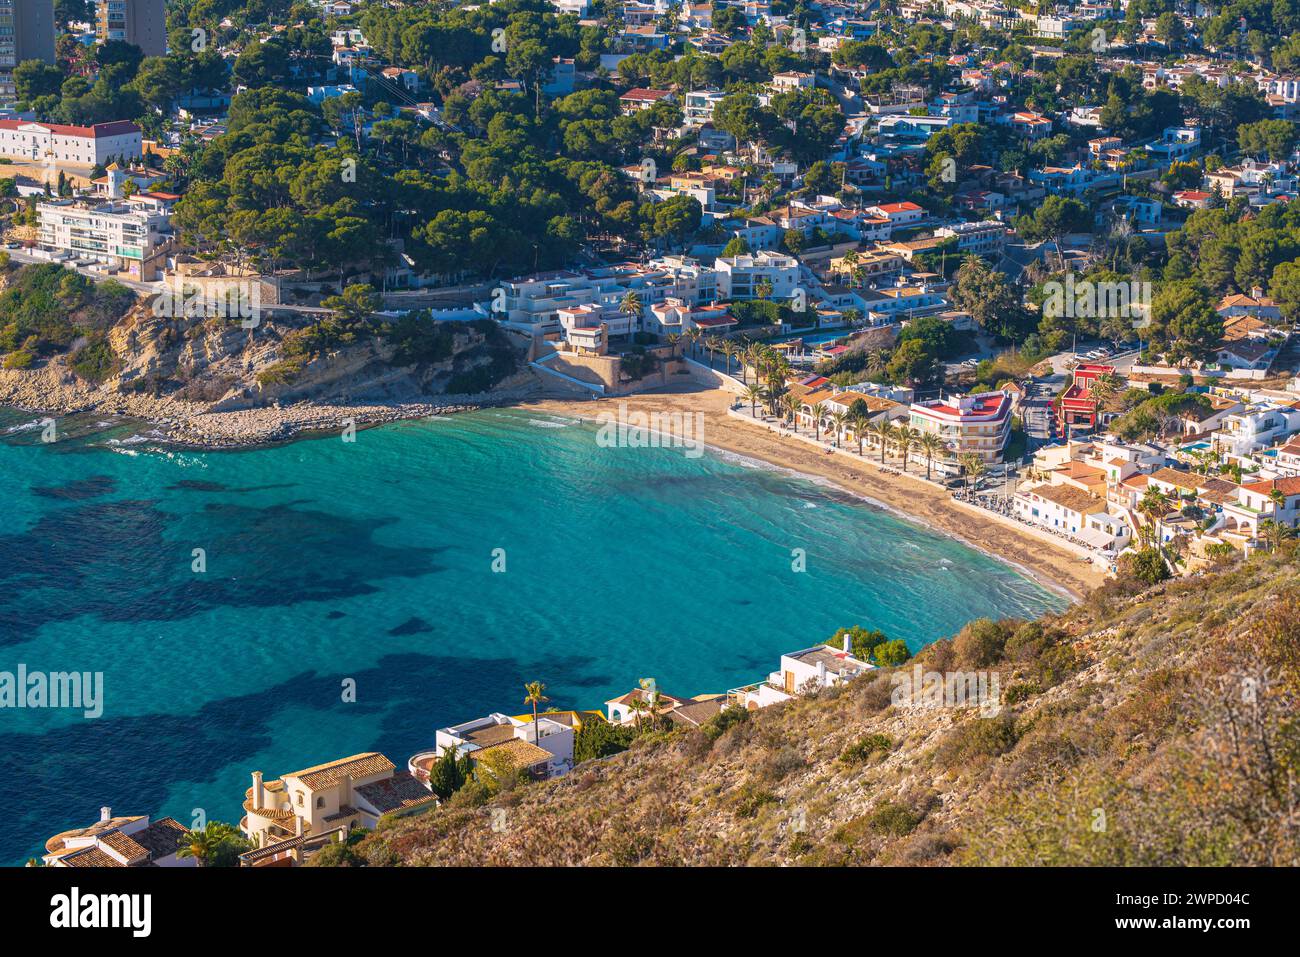 High angle view of a beach with turquoise water, Cala el Portet in Costa Blanca, Spain Stock Photo